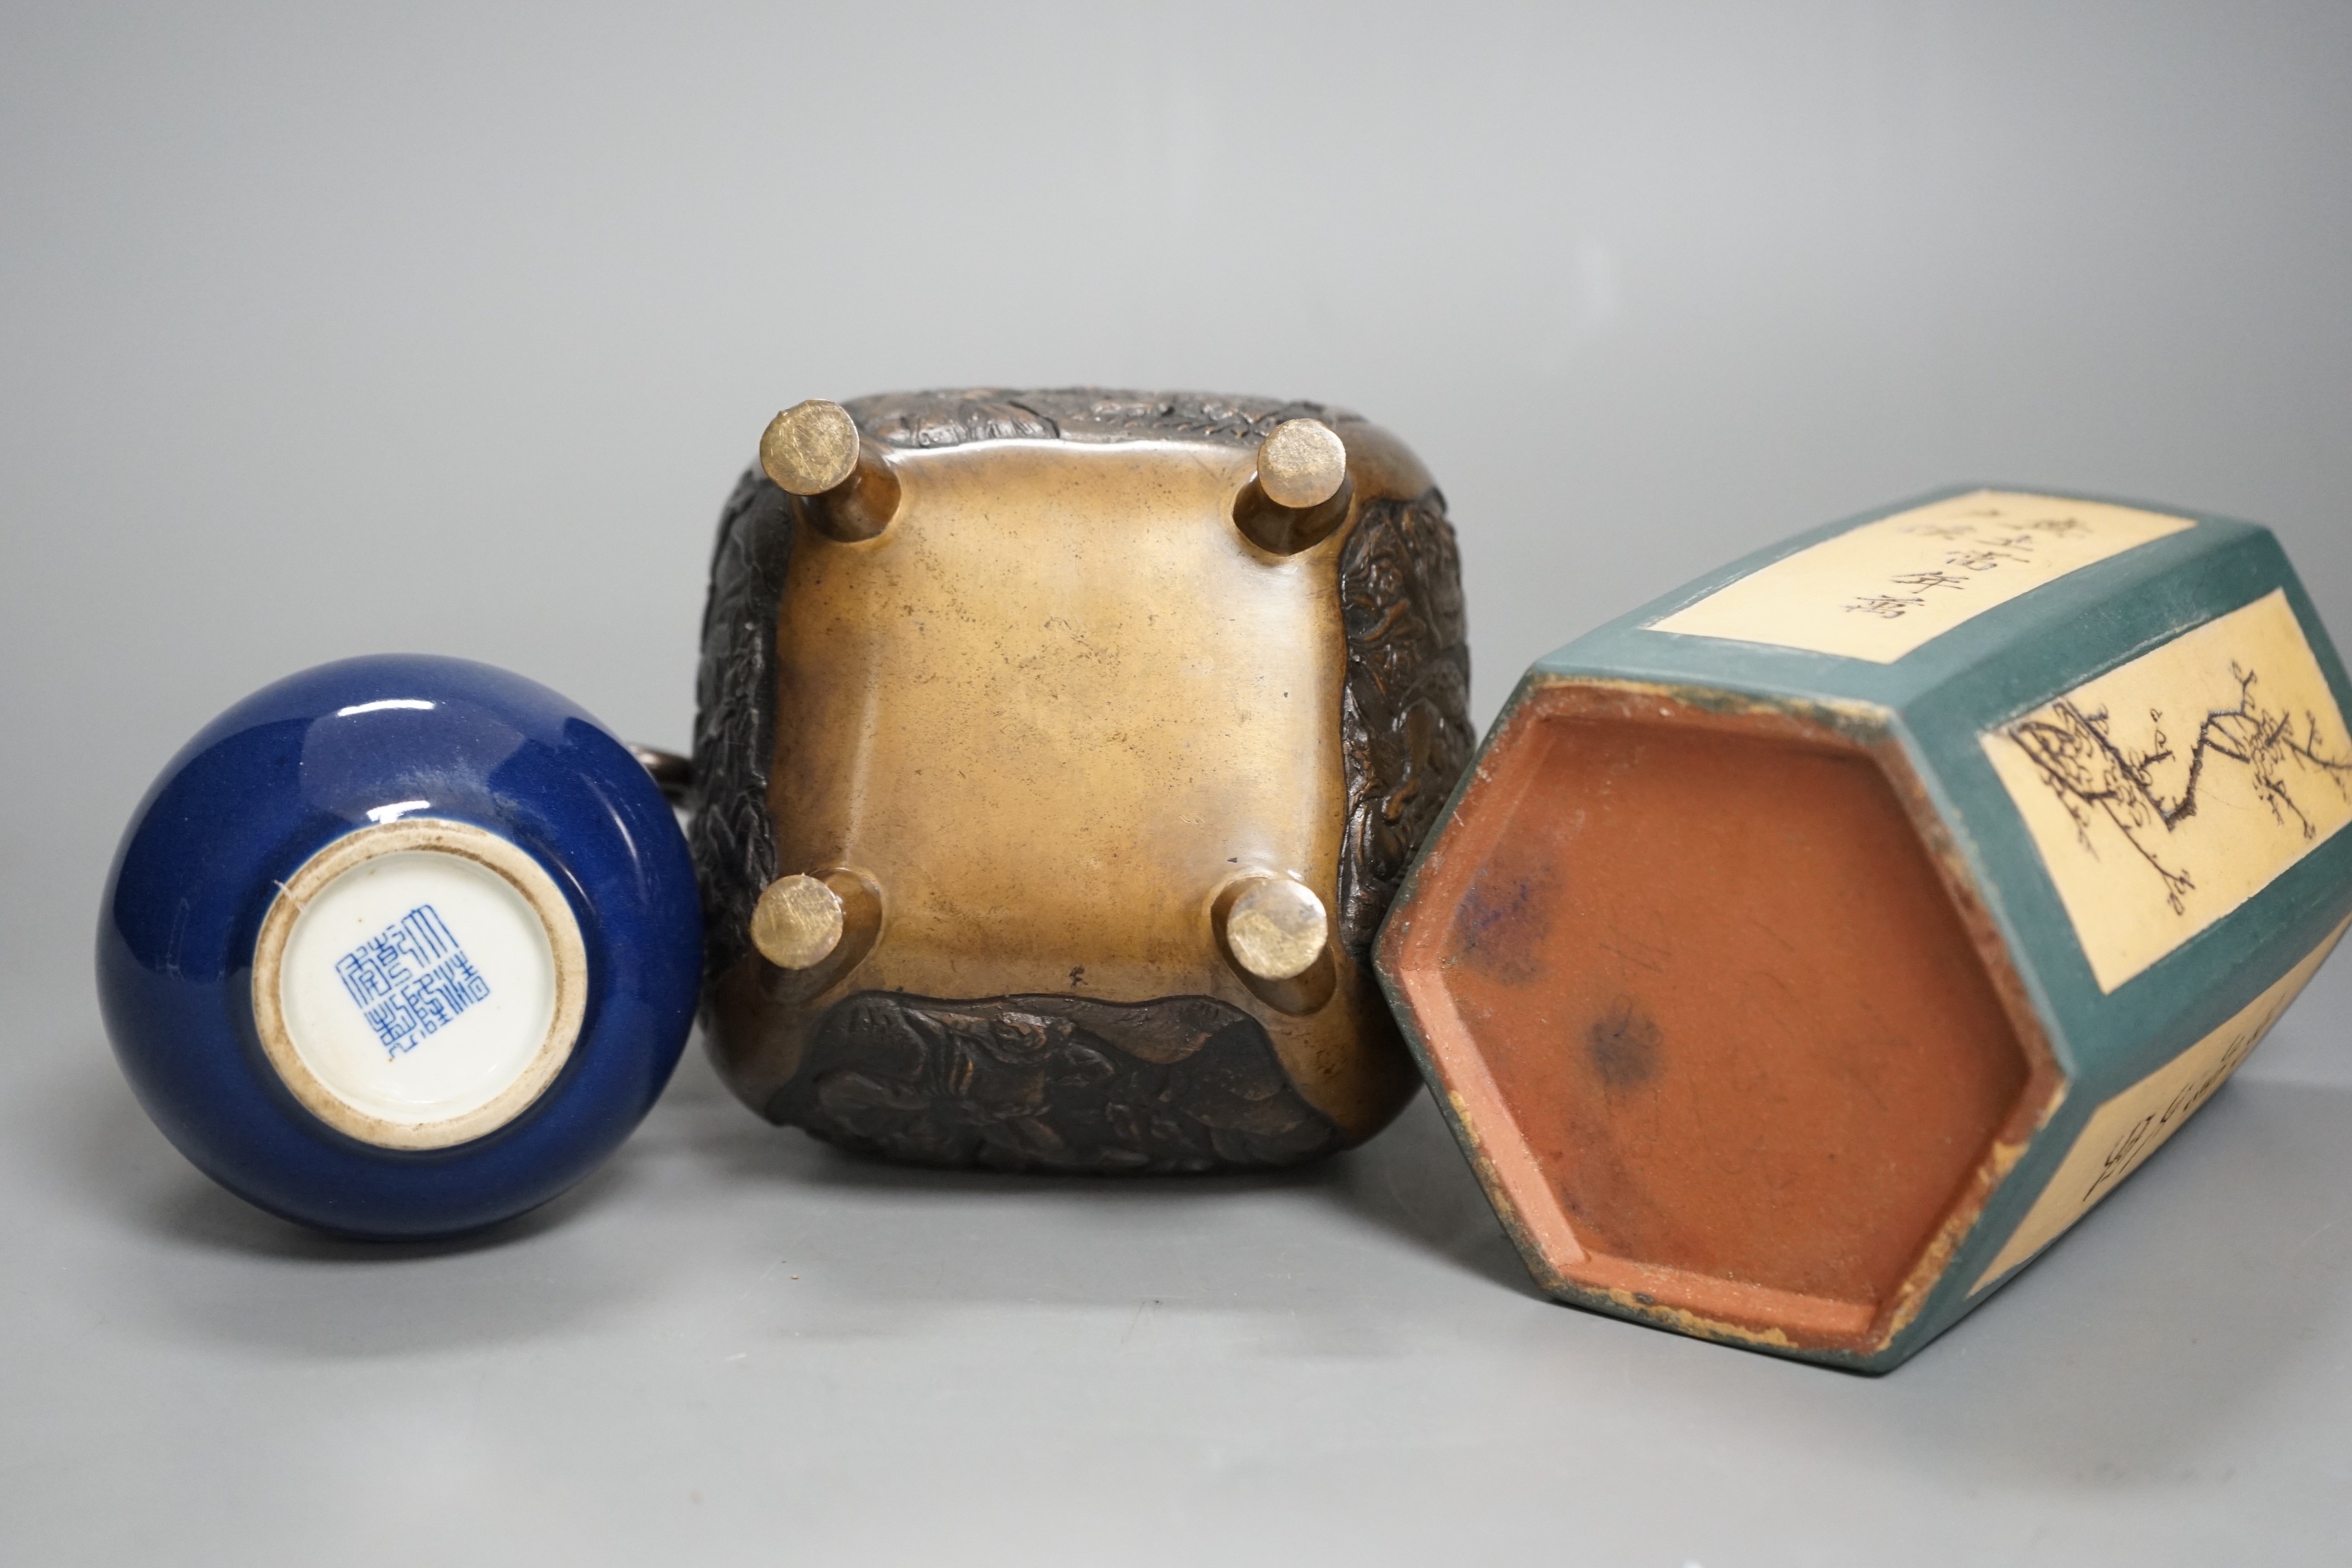 A Chinese monochrome blue vase, a hexagonal pottery brush pot and a bronze censer and cover, 15cm